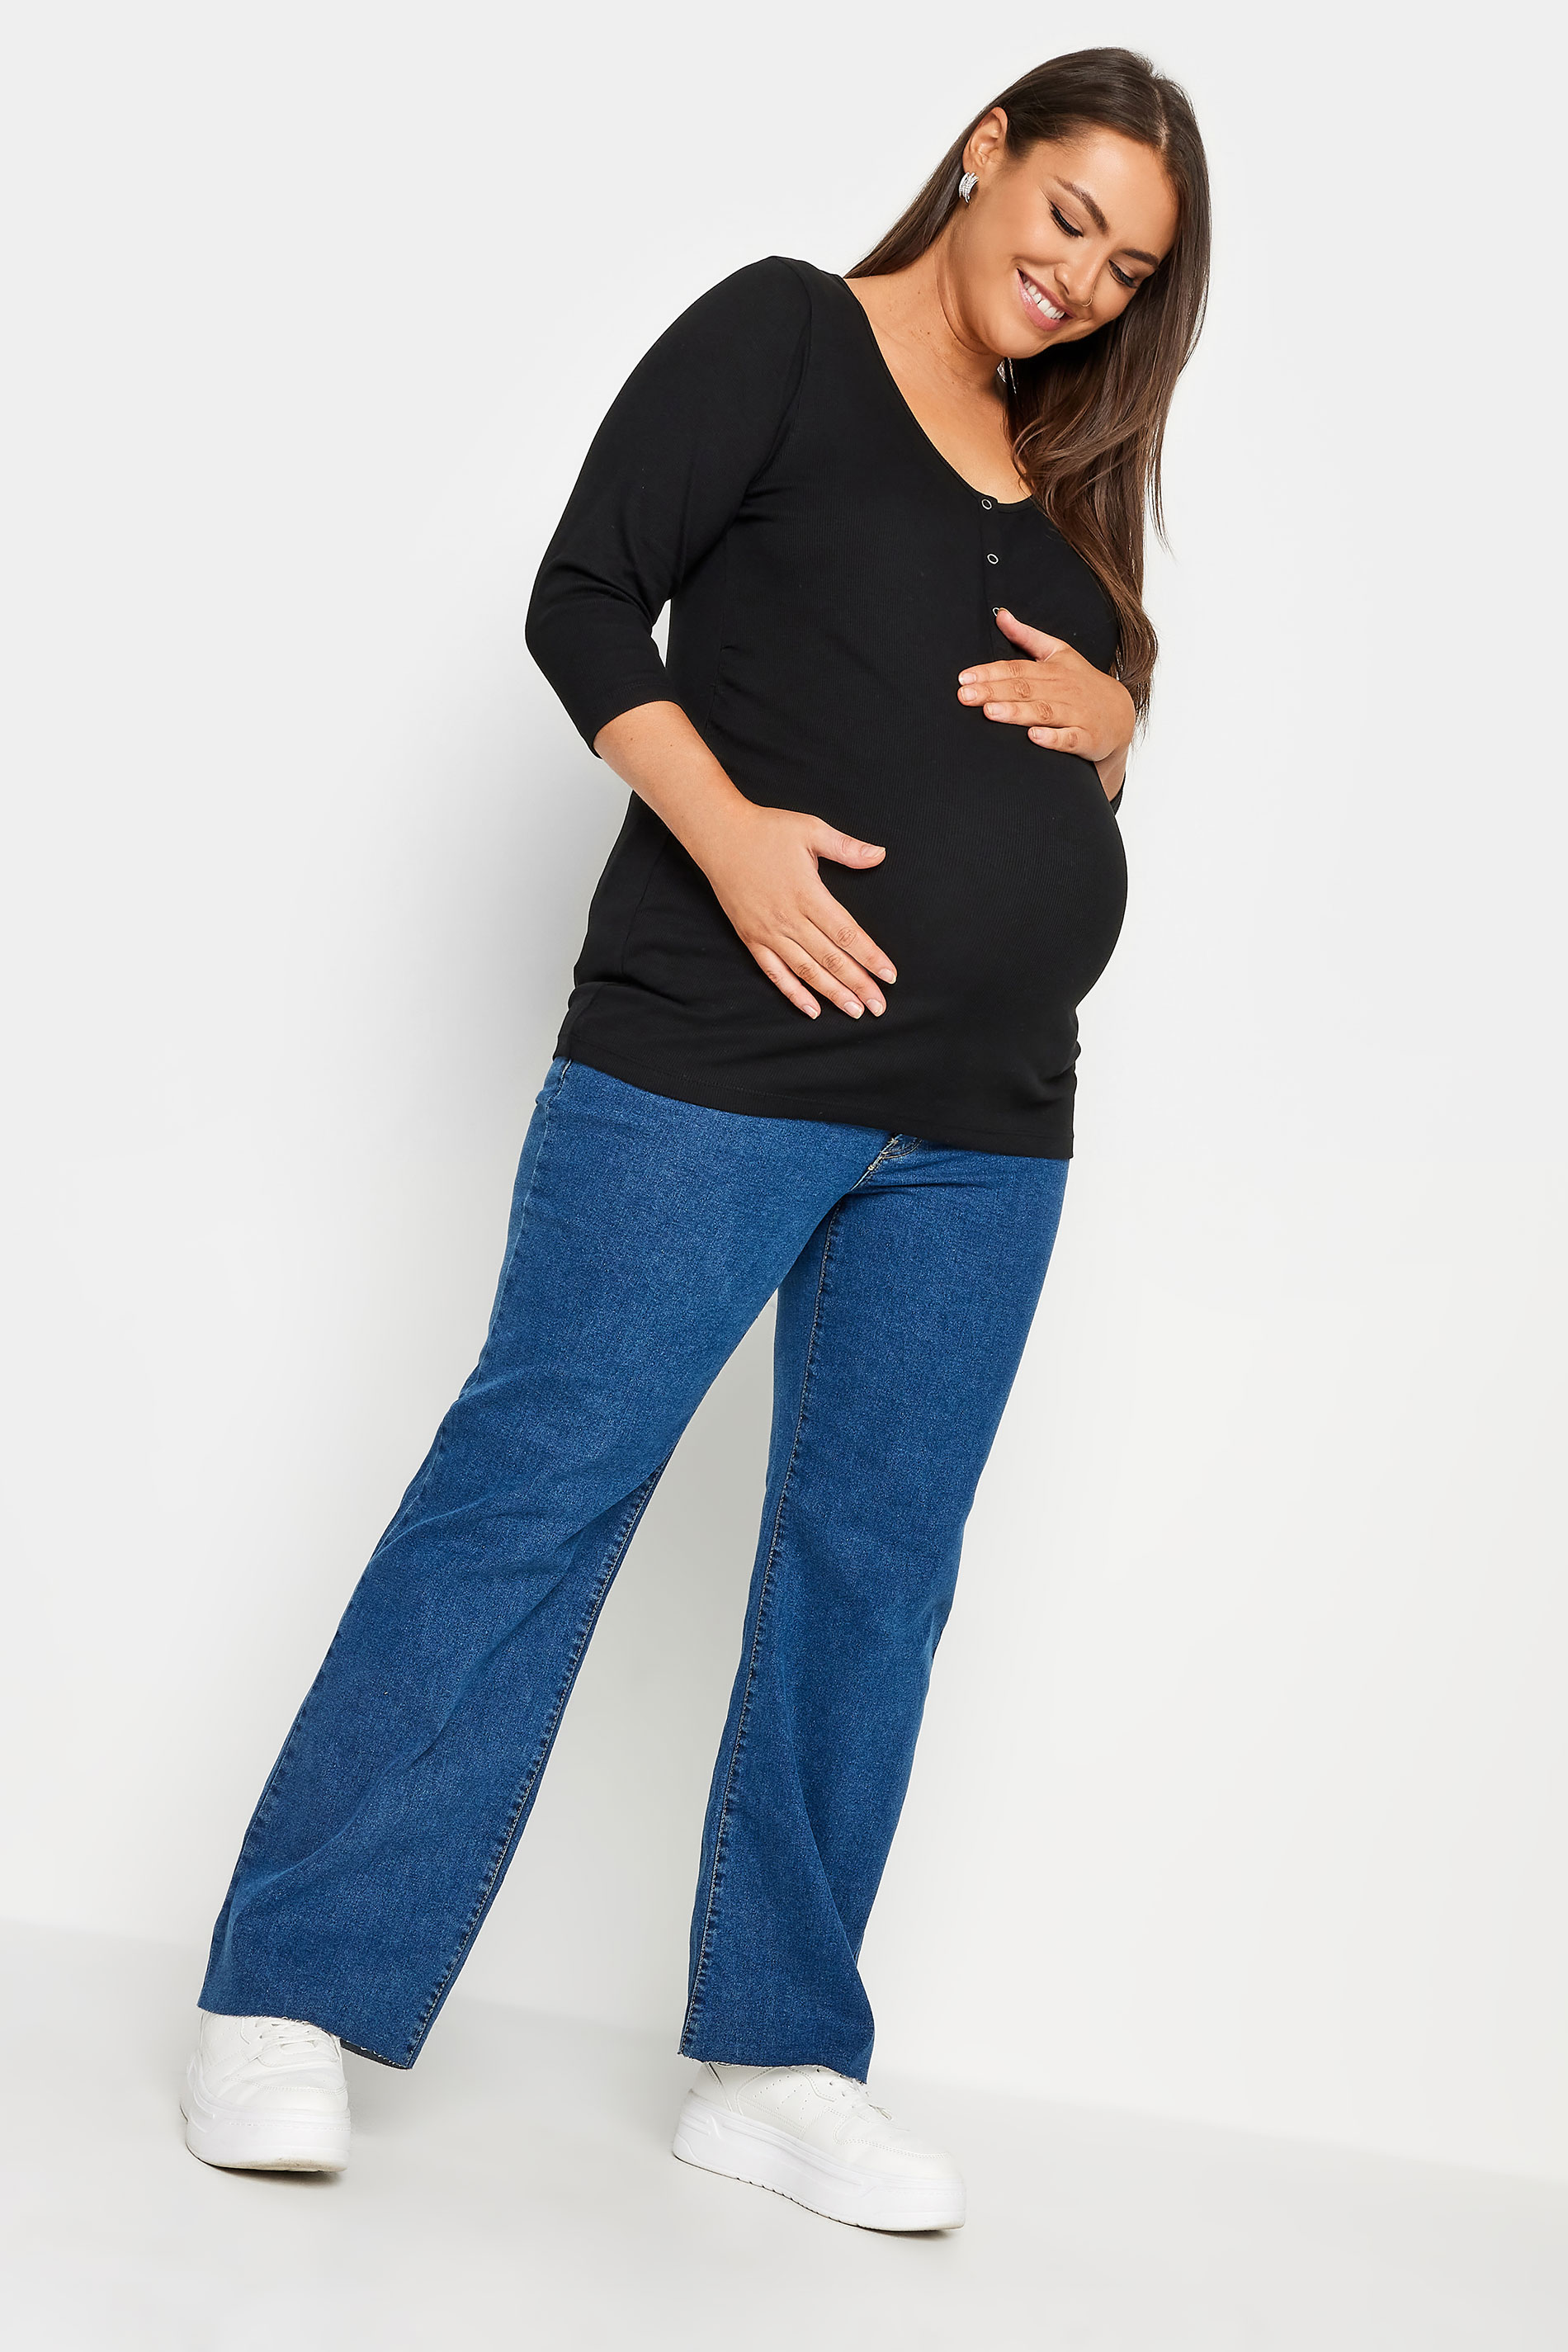 BUMP IT UP MATERNITY Plus Size Black Ribbed Popper Fastening Top | Yours Clothing 2